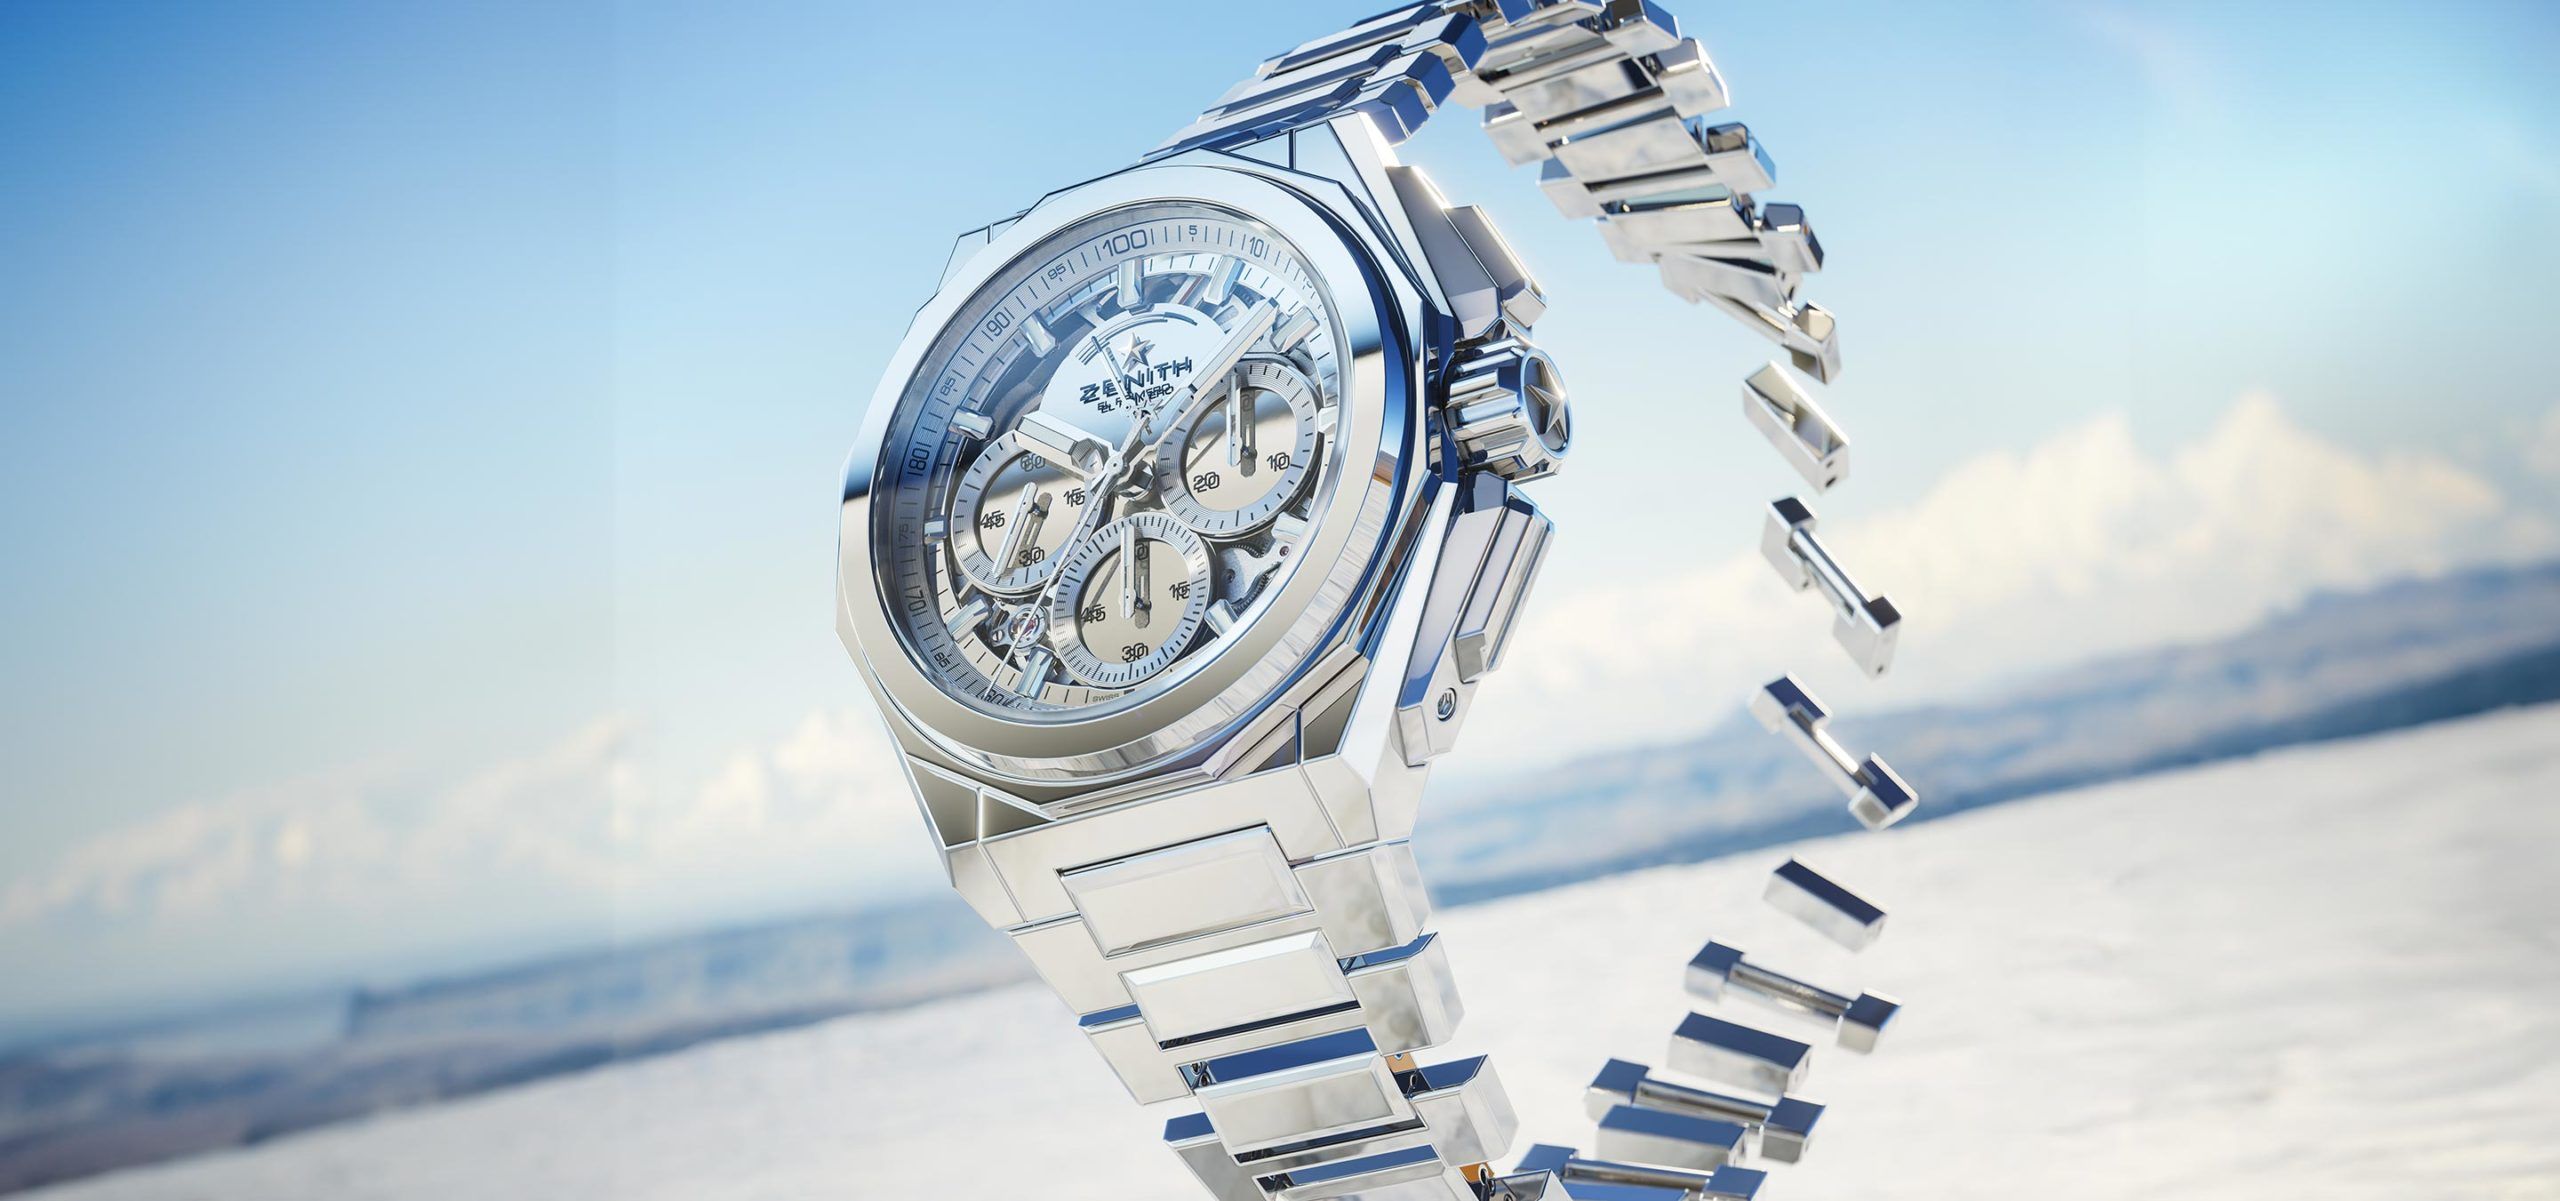 A ‘Reflective’ State Of Mind: Presenting The Zenith Defy Extreme Mirror